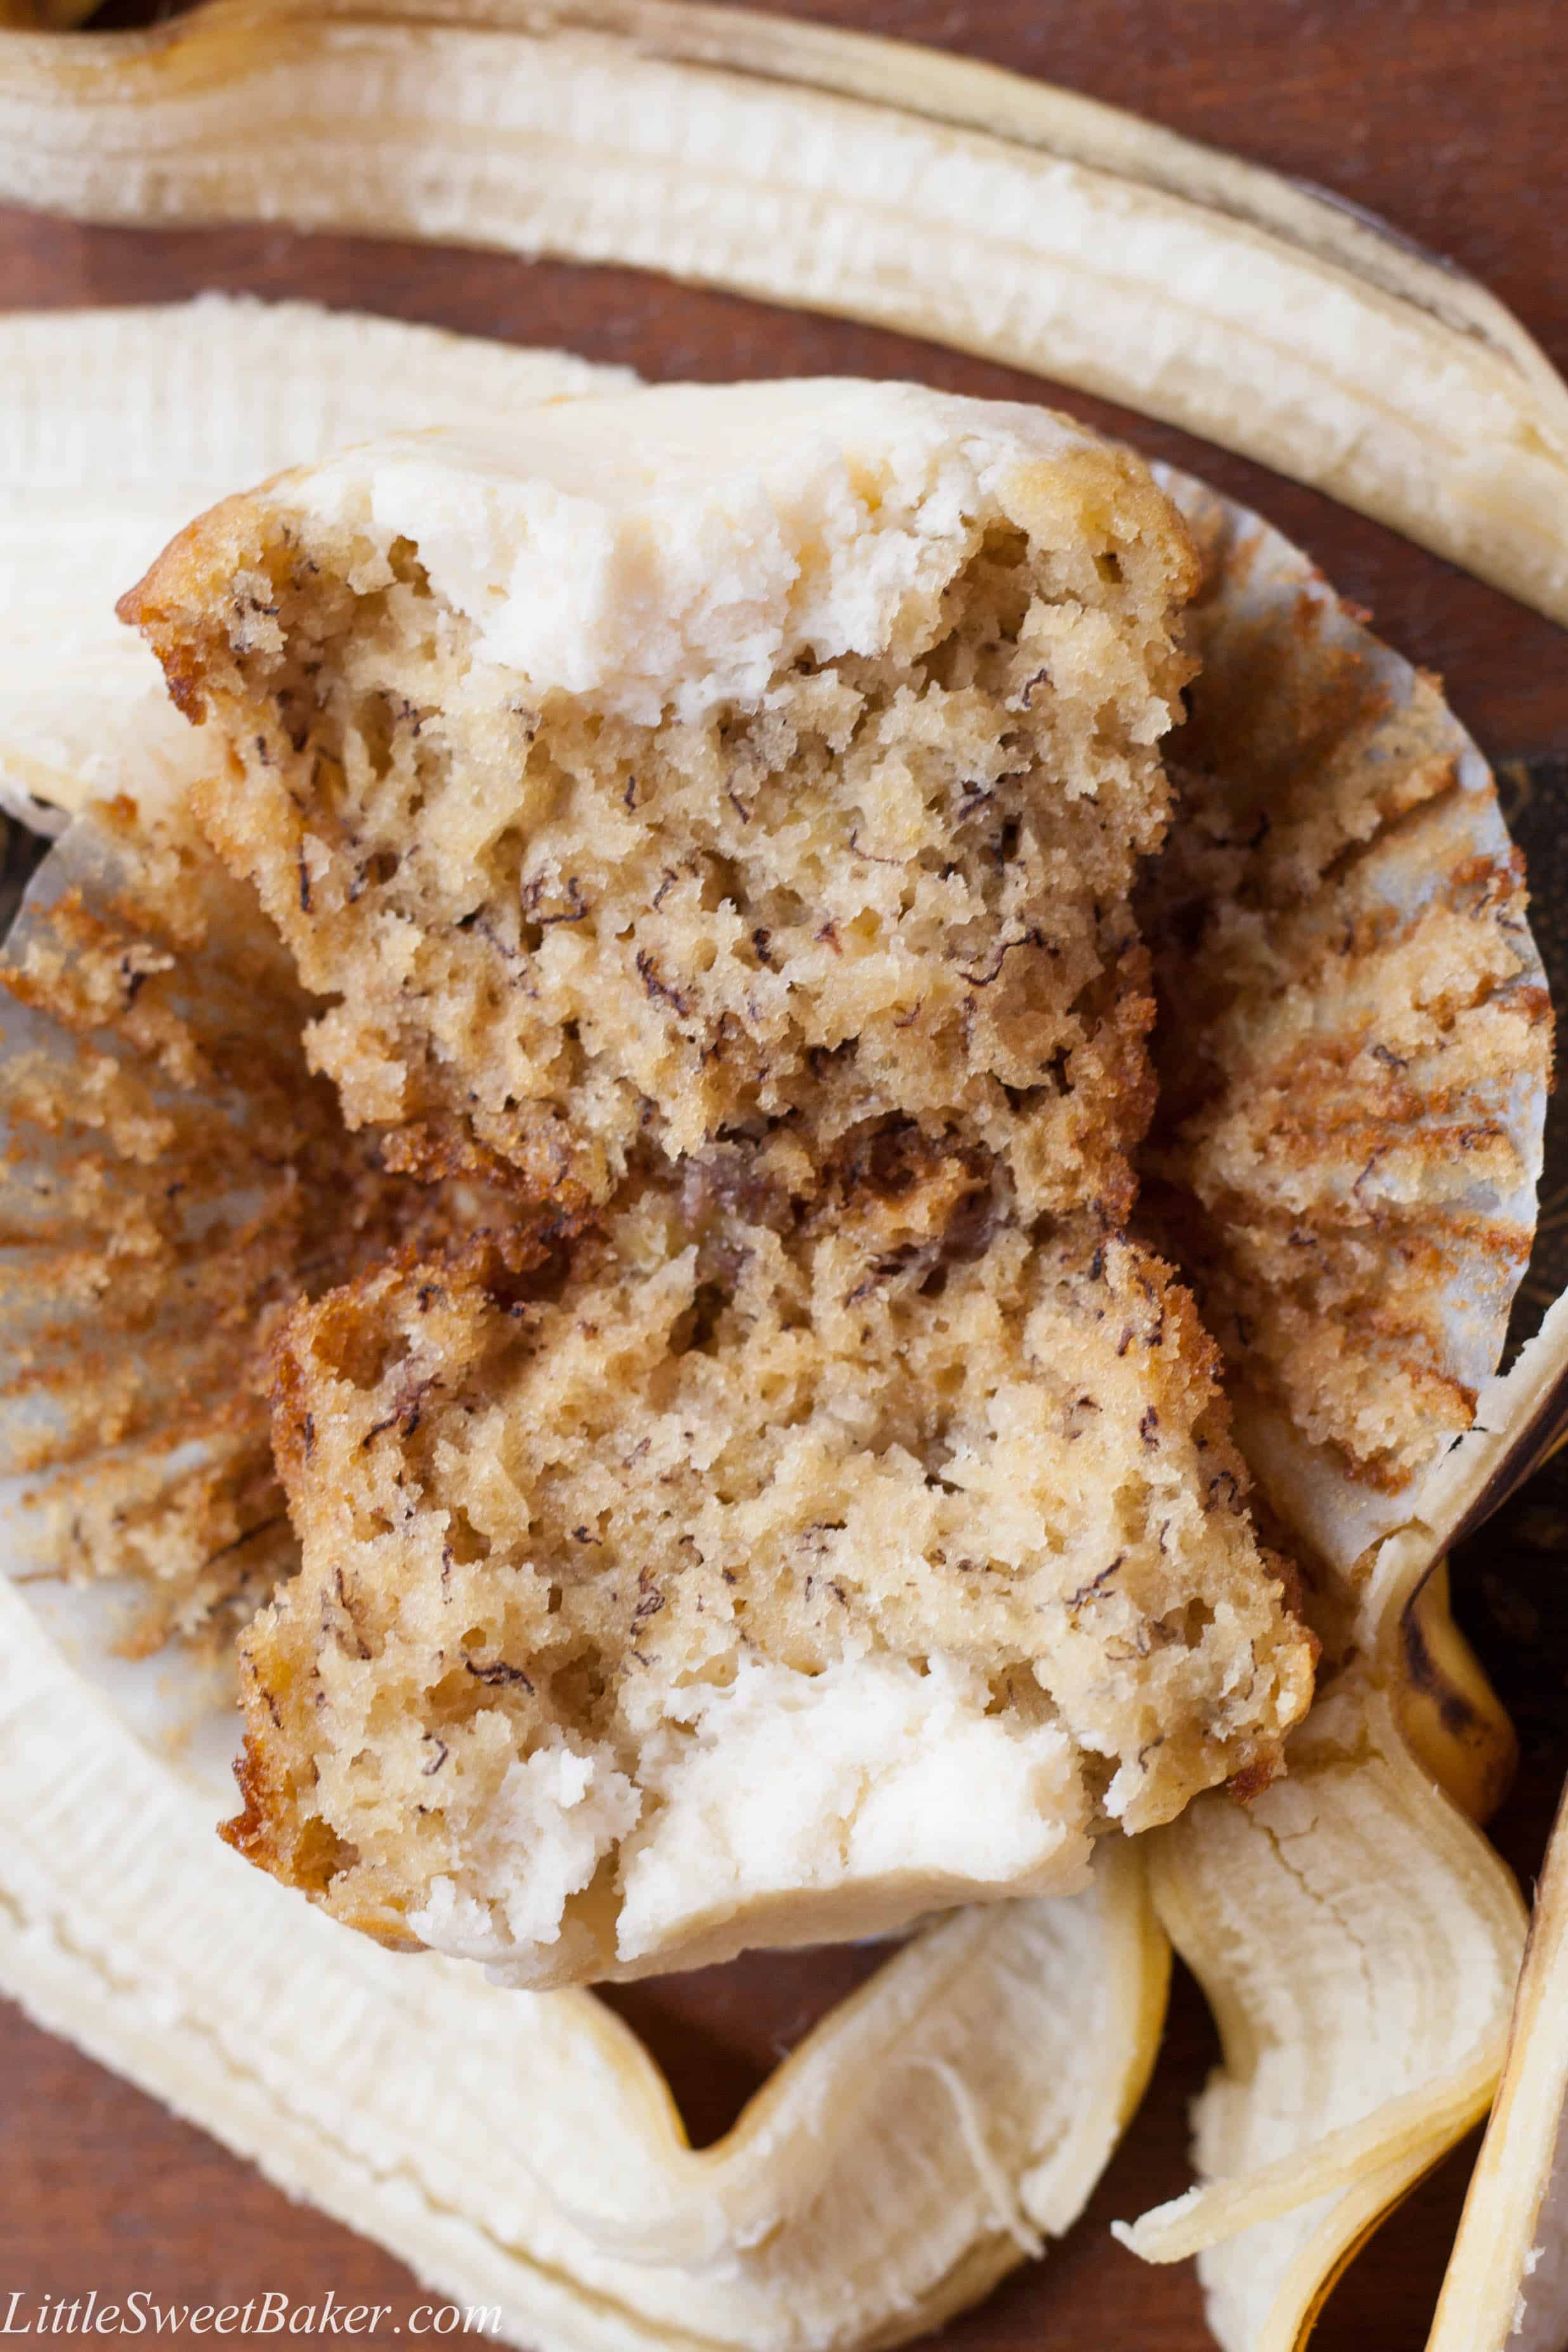 The Ultimate Best Banana Muffin. Light, fluffy and cake-like banana muffin with a cream cheese meringue baked on top. My favorite banana baked good.